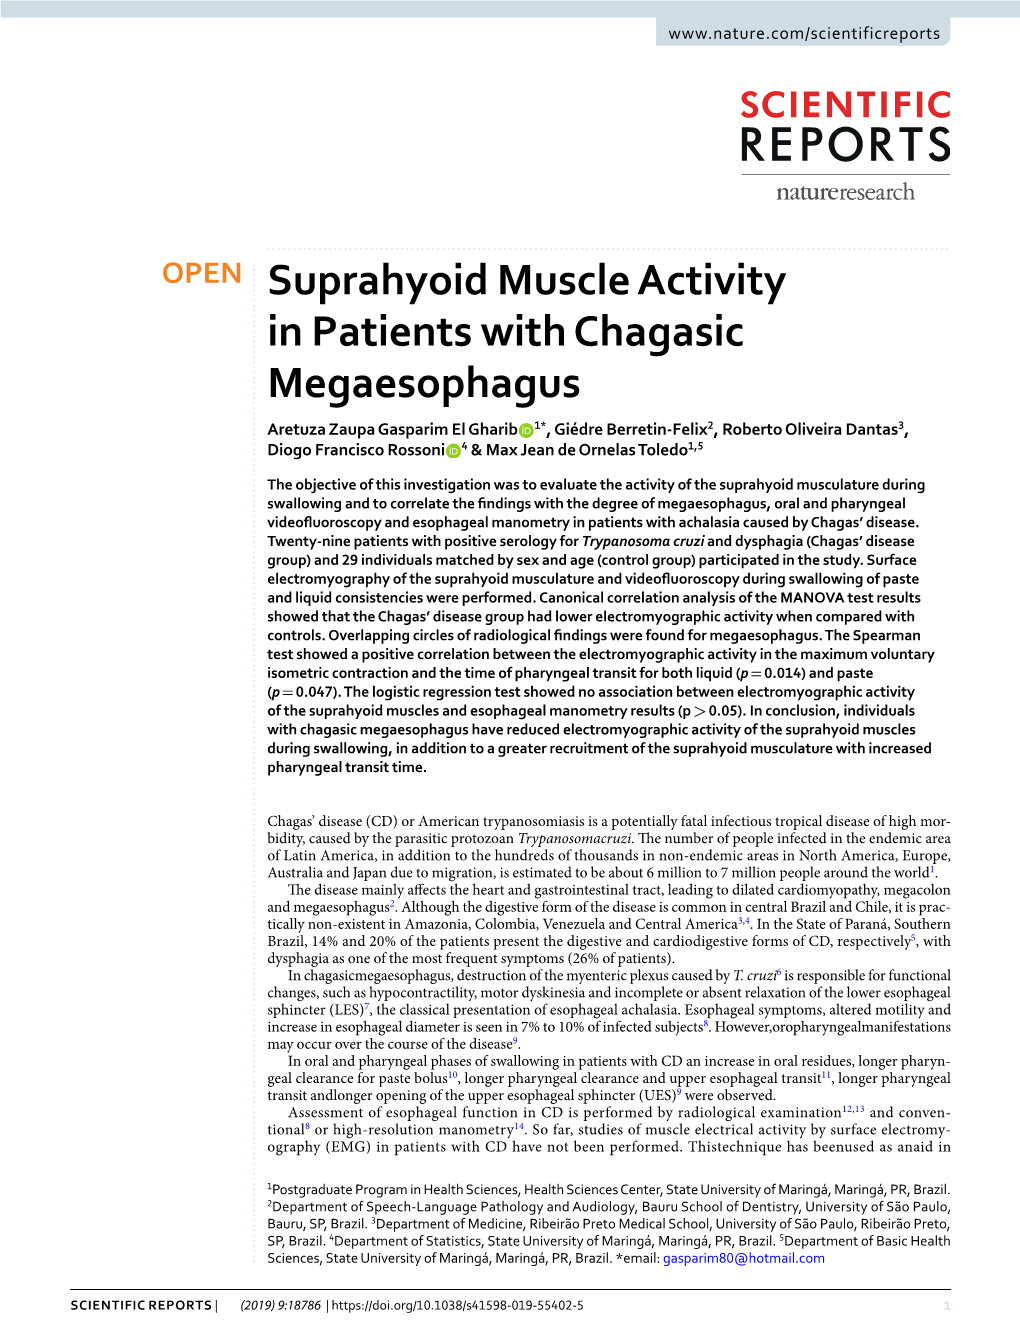 Suprahyoid Muscle Activity in Patients with Chagasic Megaesophagus